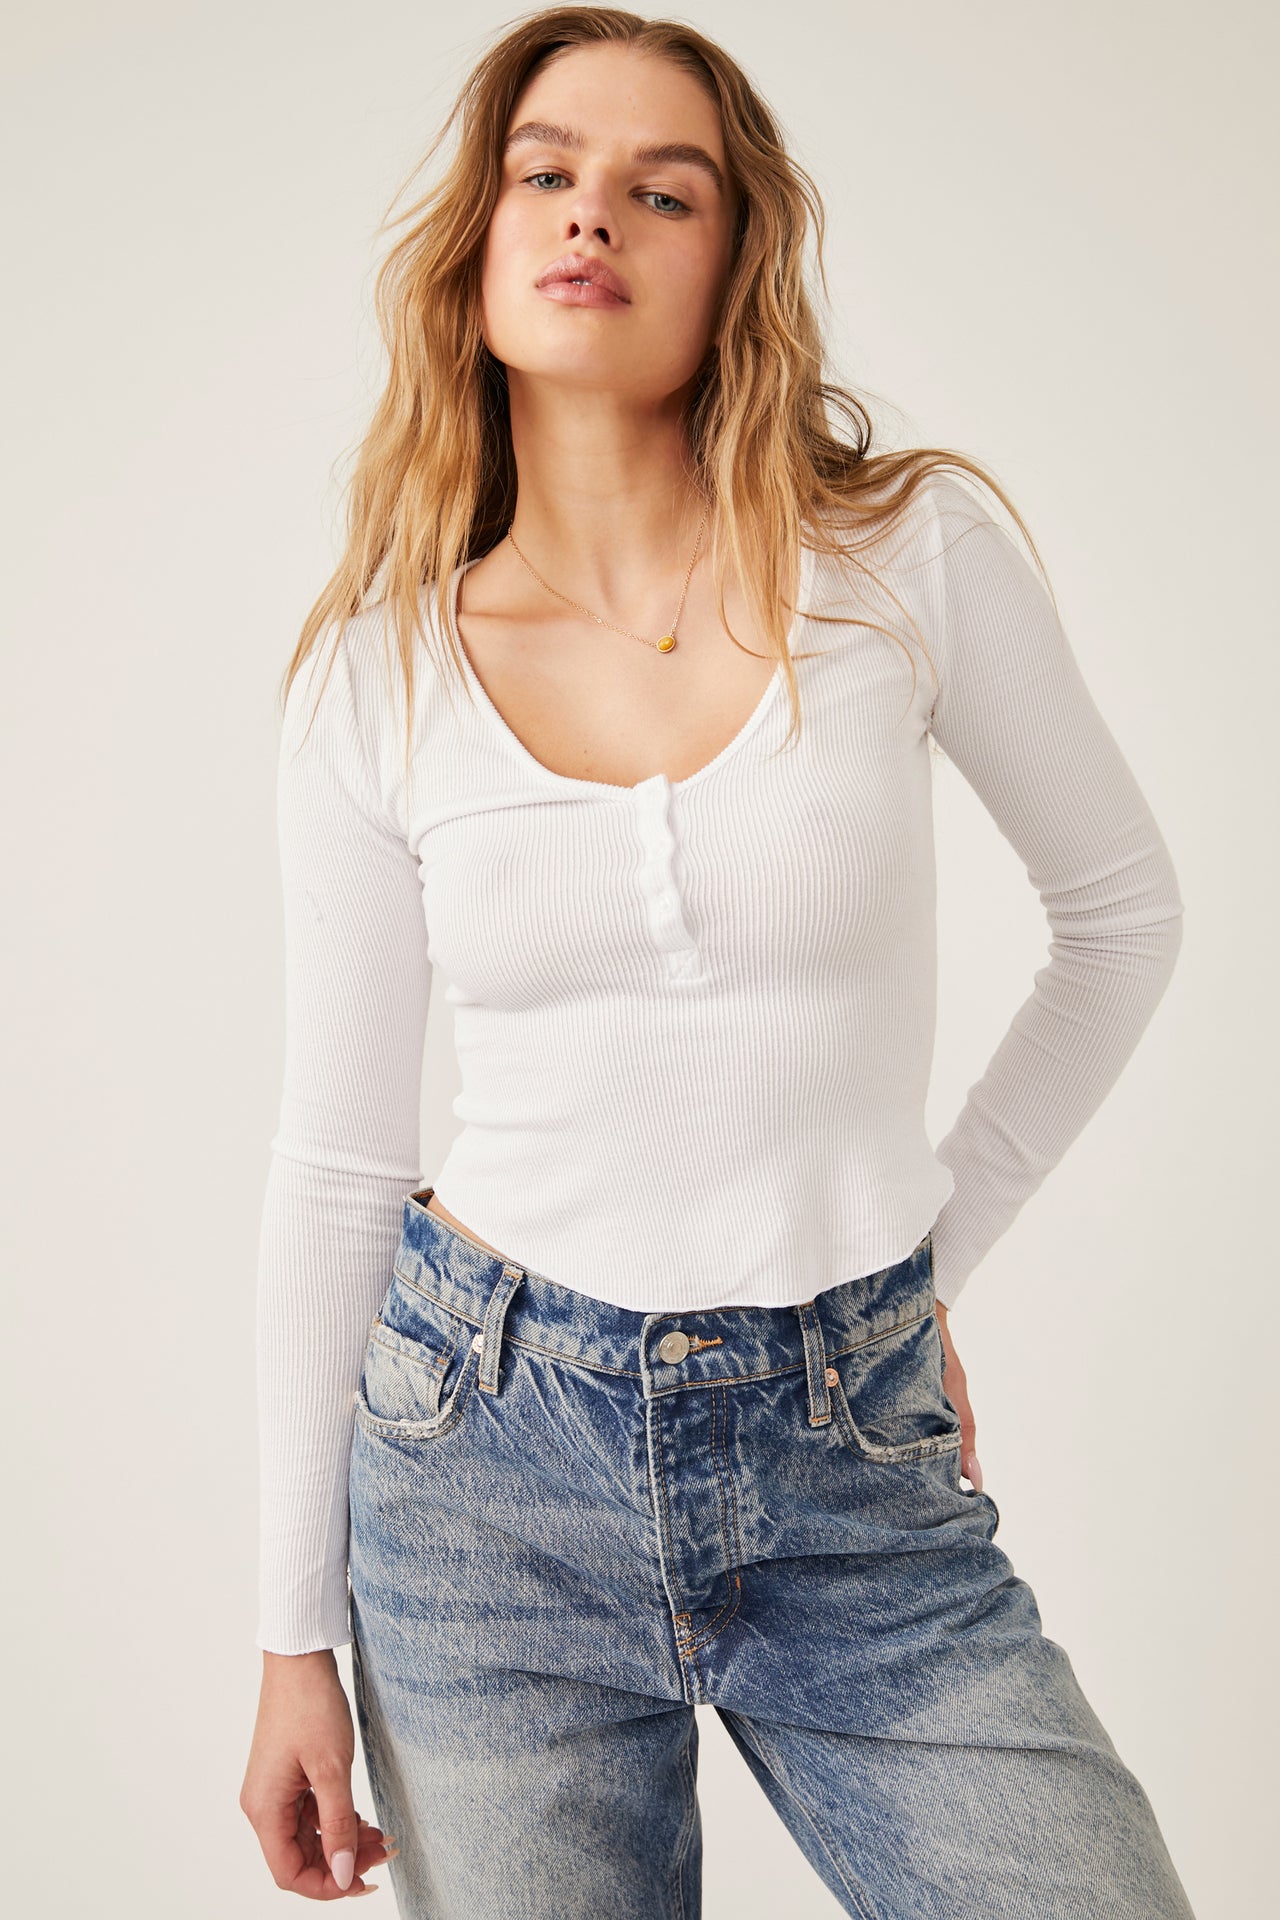 Keep It Basic Top White, Tops by Free People | LIT Boutique